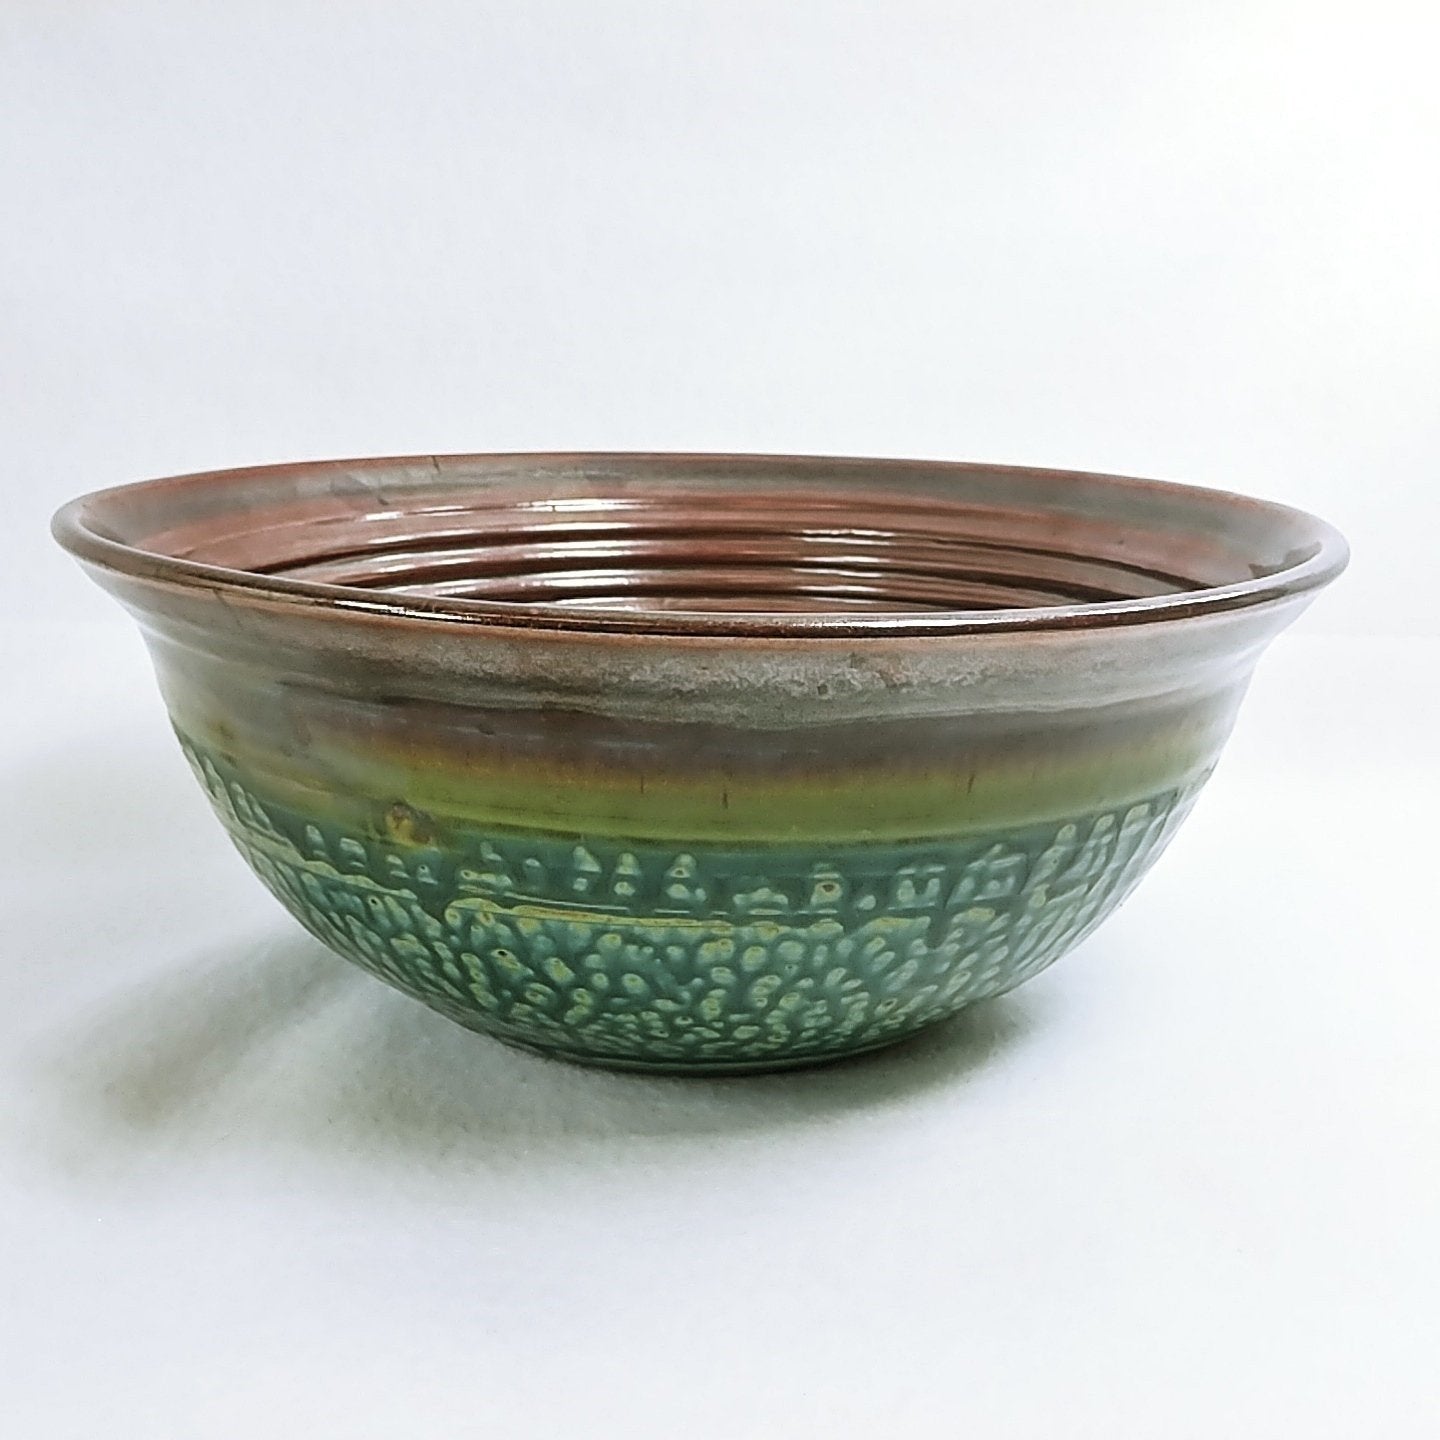 Ceramic Pottery Lg. Mixing Bowl Artist Handmade Iridescent Signed & Dated